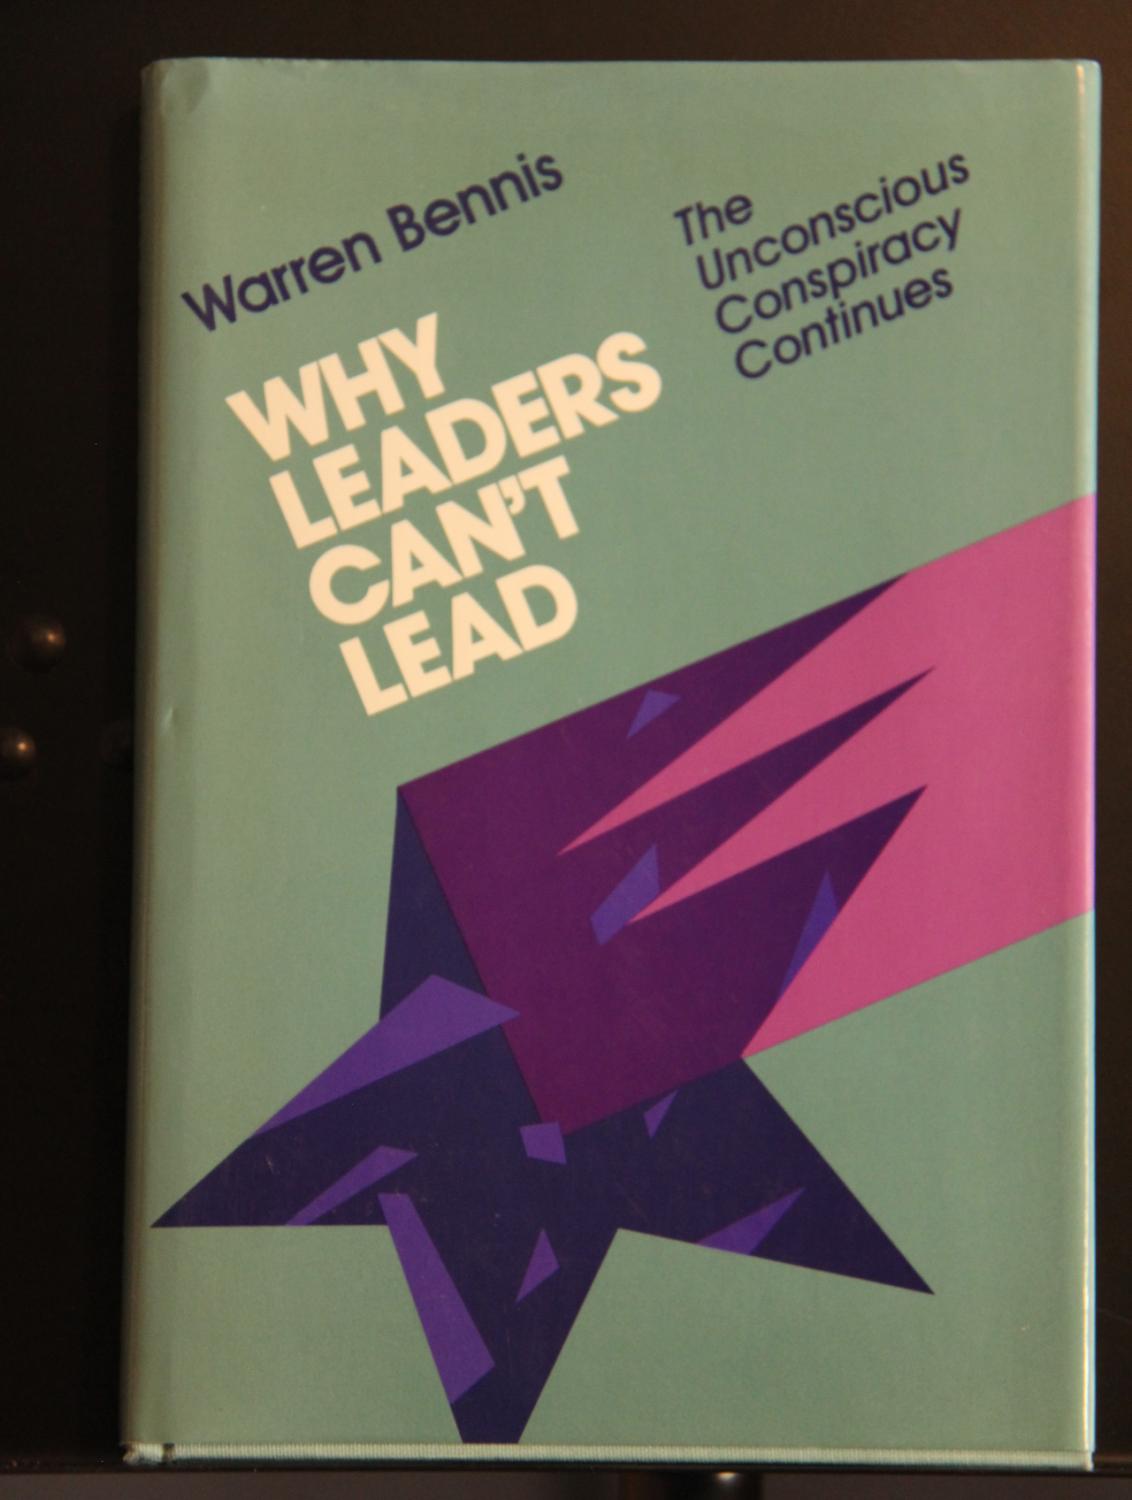 Why Leaders Can't Lead: The Unconscious Conspiracy Continues (Jossey Bass Business and Management Series) - Bennis, Warren